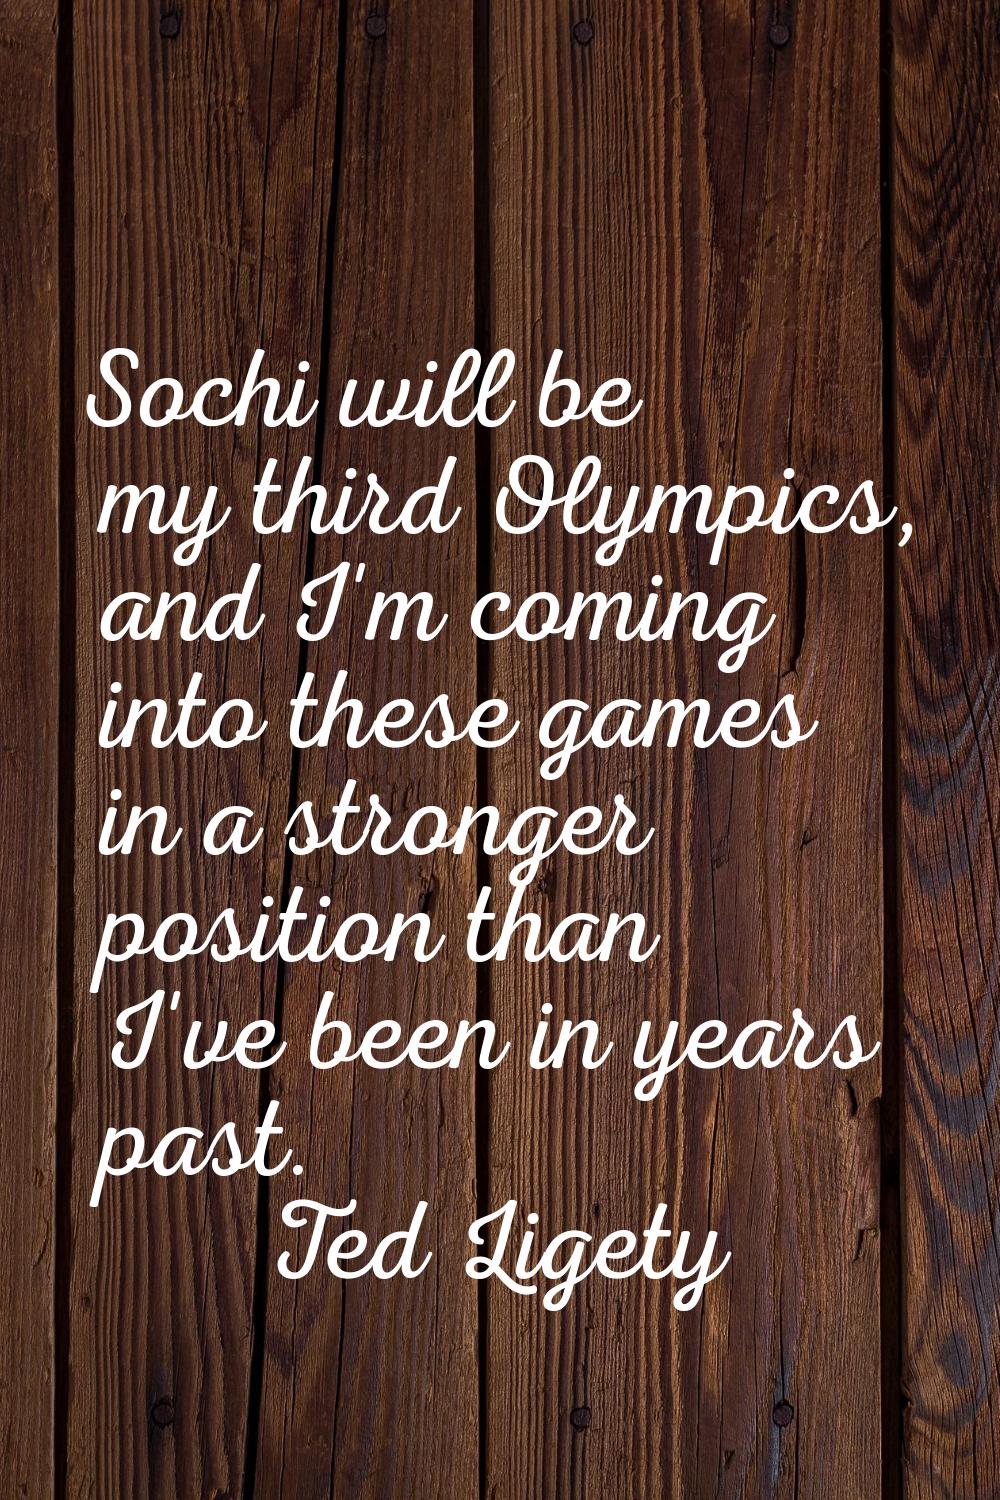 Sochi will be my third Olympics, and I'm coming into these games in a stronger position than I've b